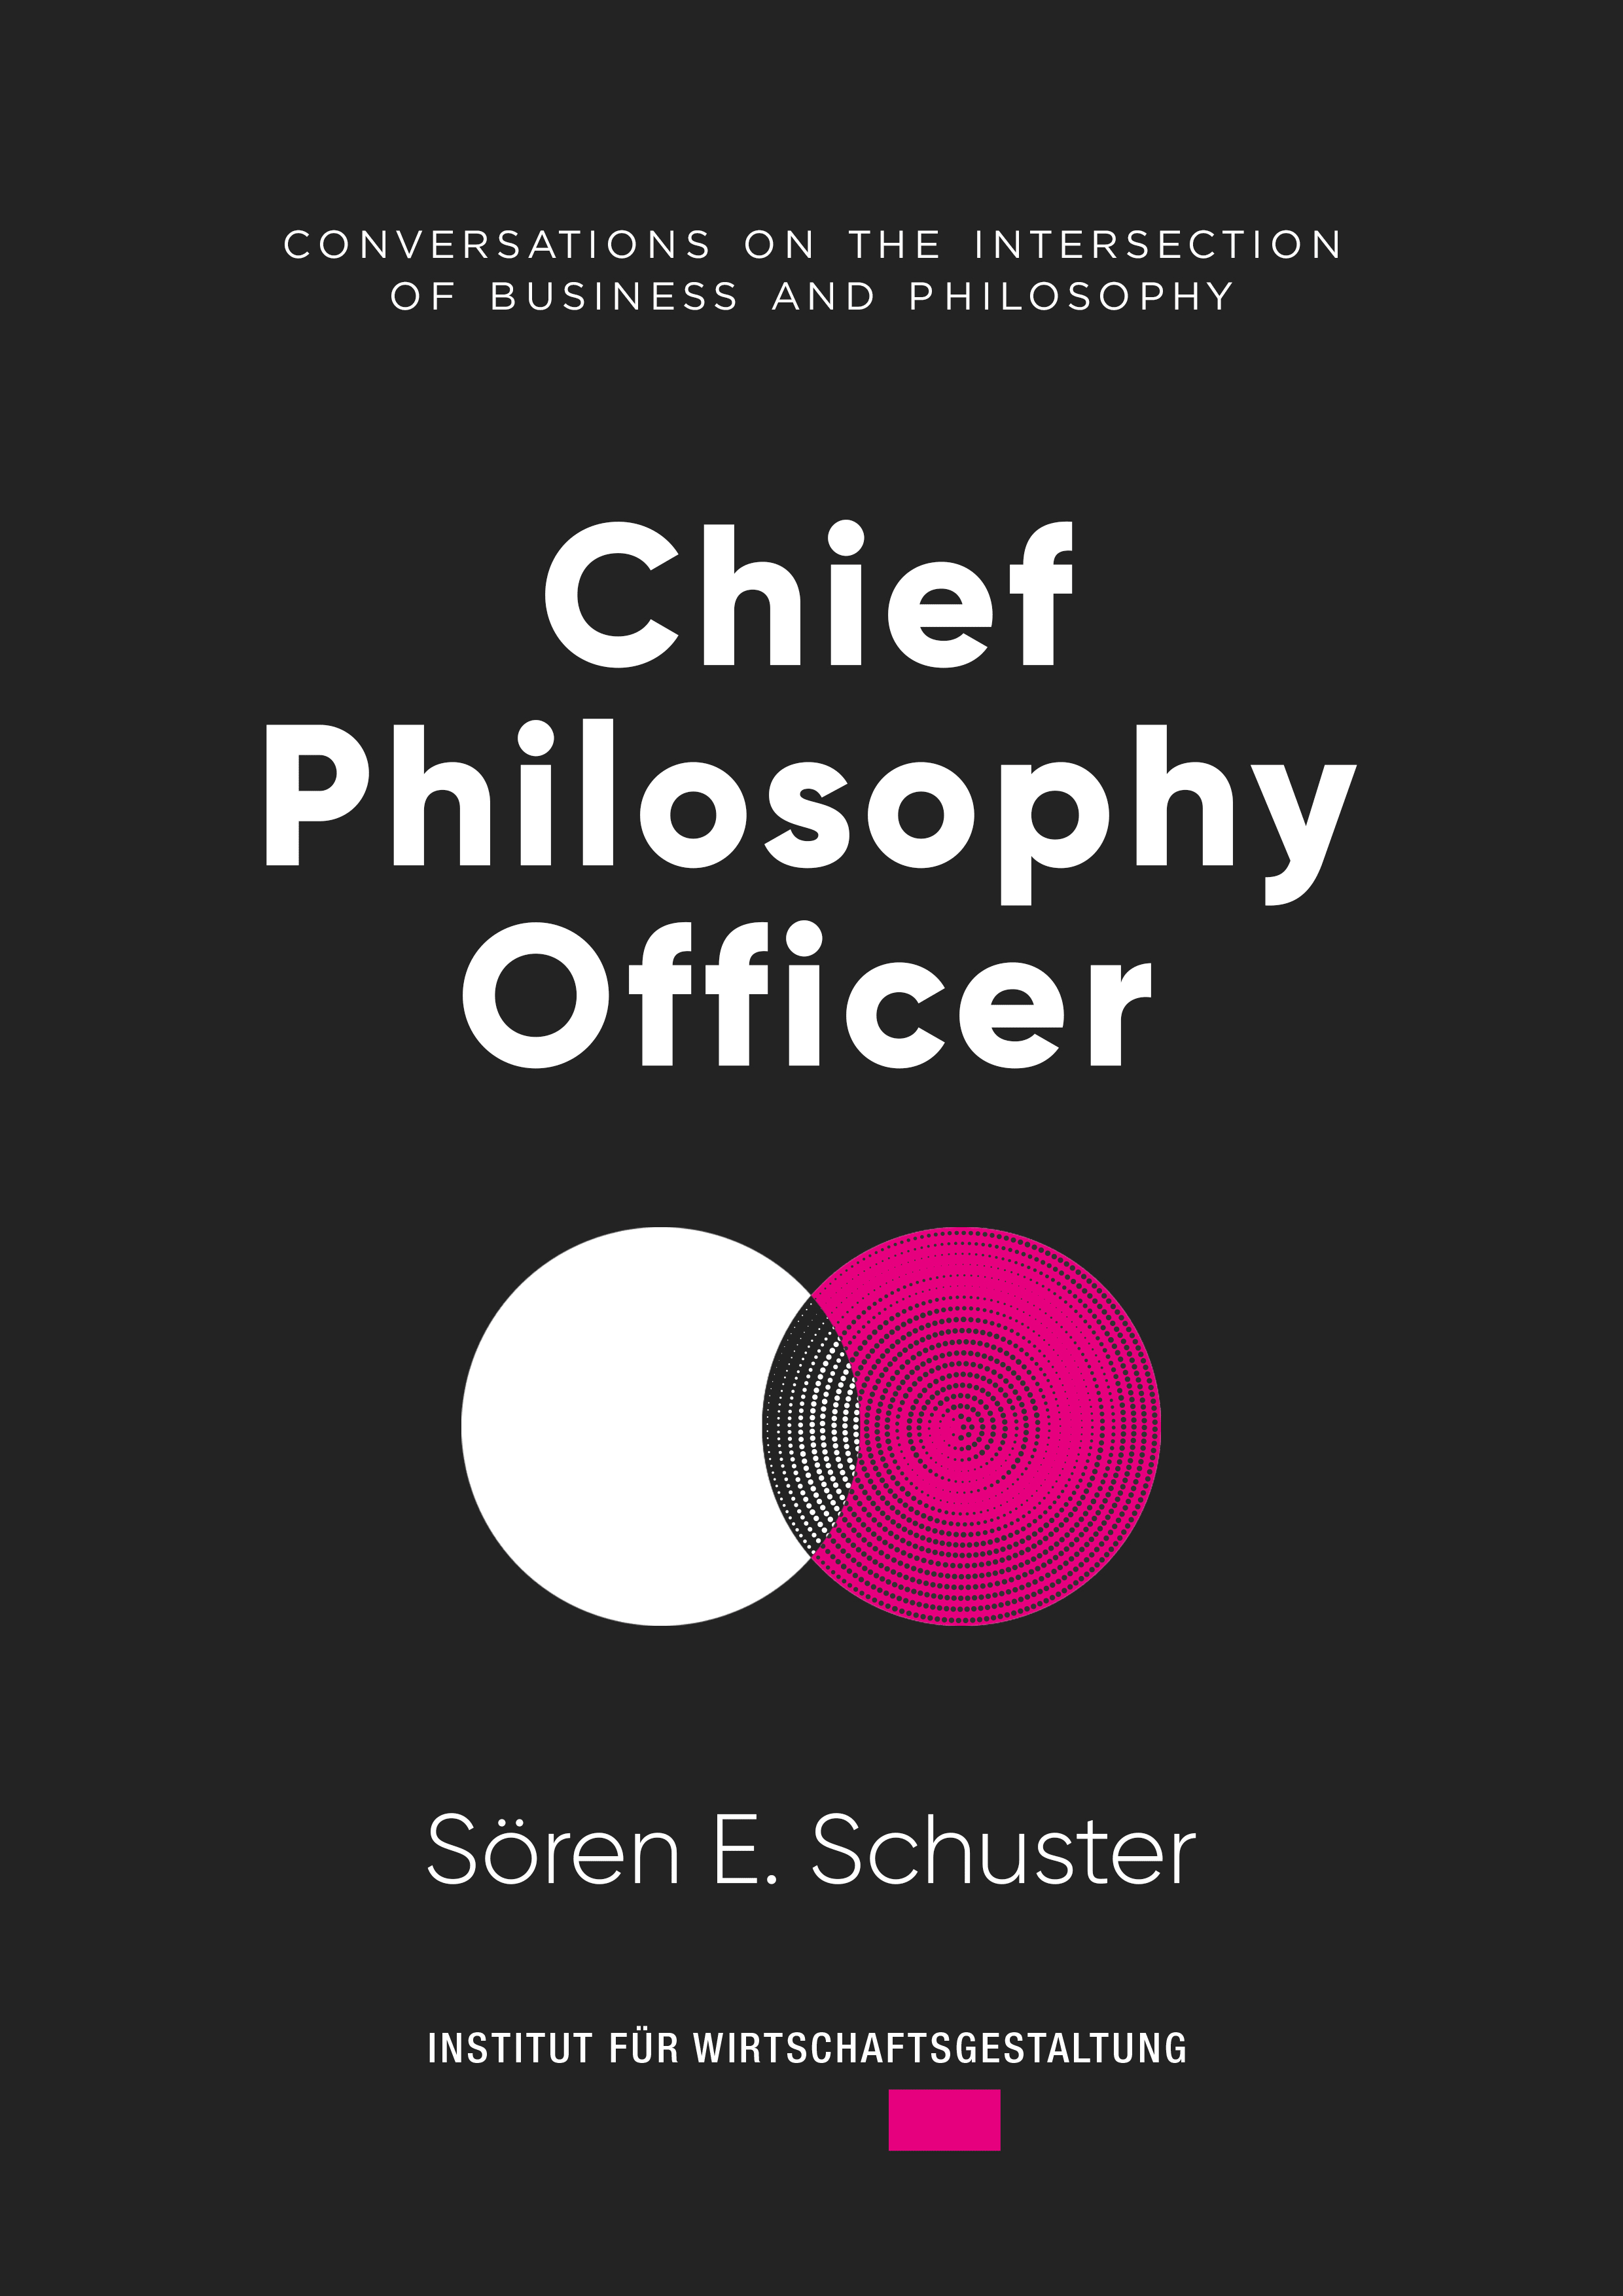 Chief Philosophy Officer - Conversations on the Intersection of Business and Philosophy